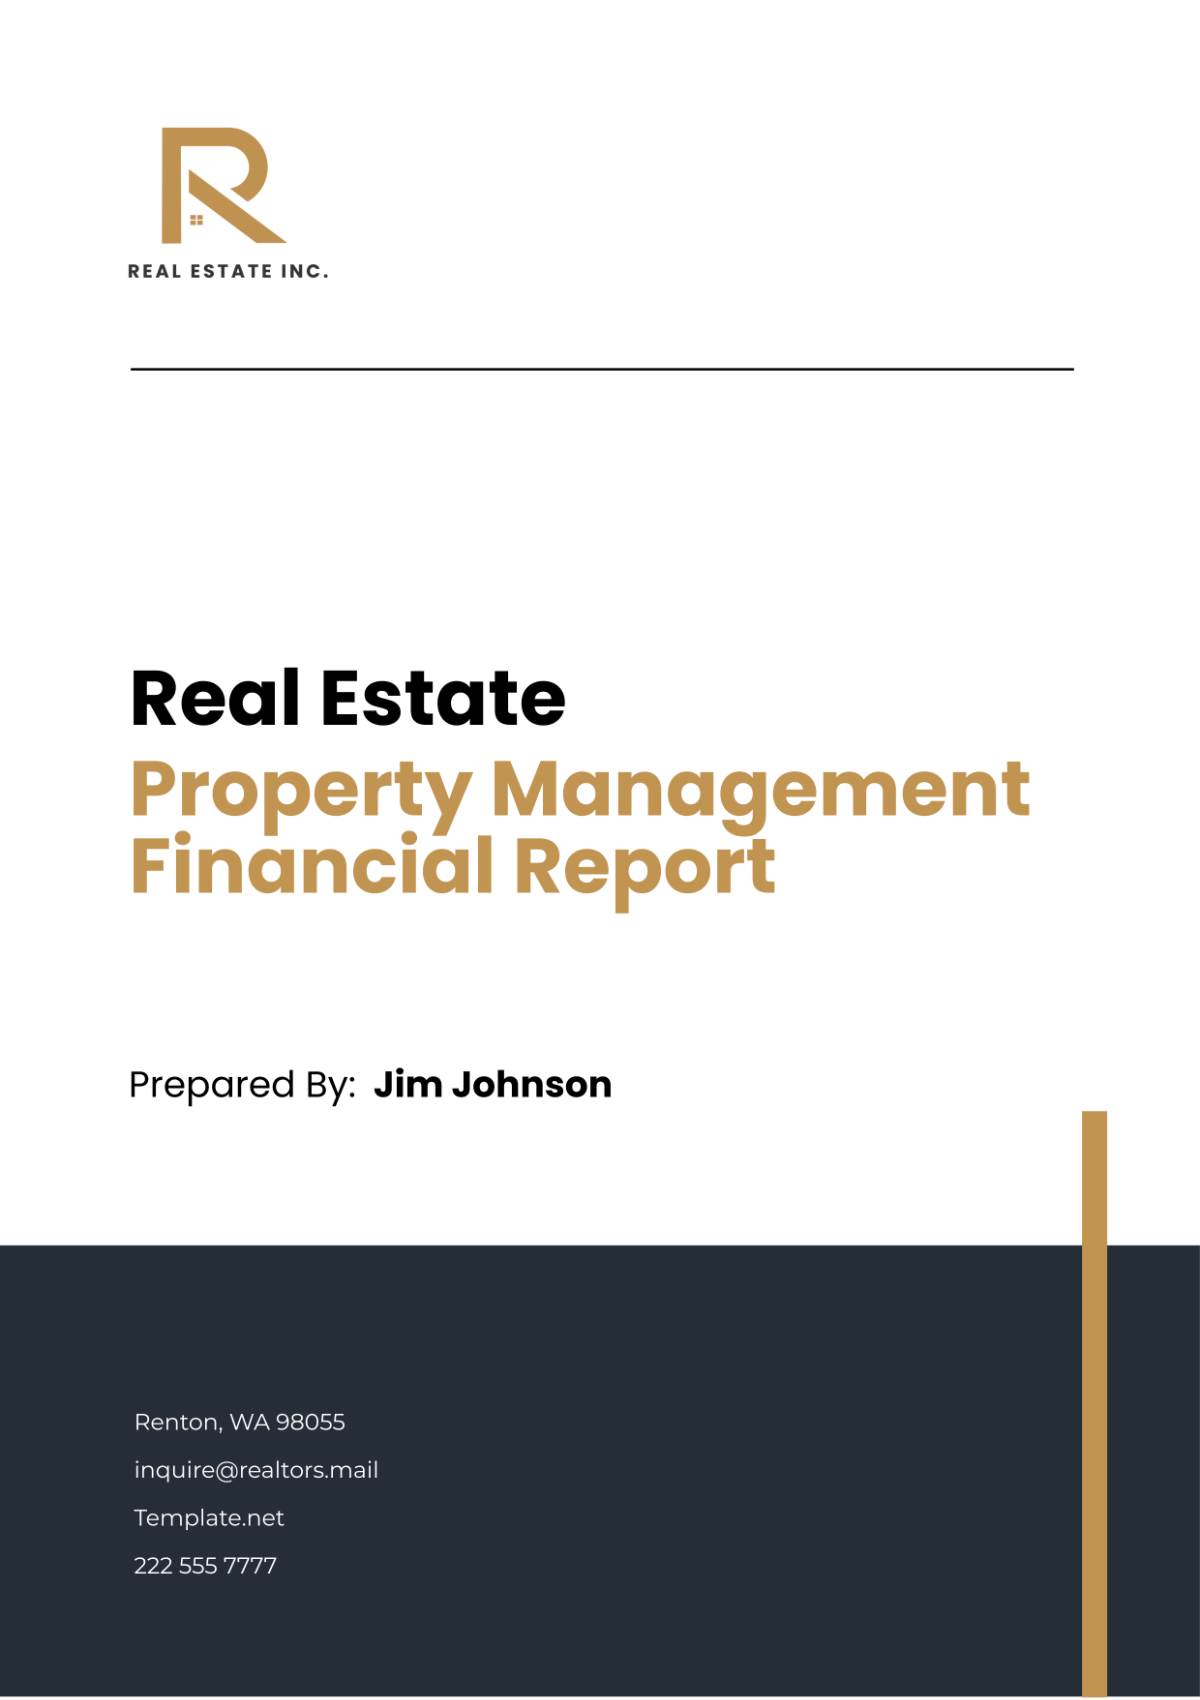 Real Estate Property Management Financial Report Template